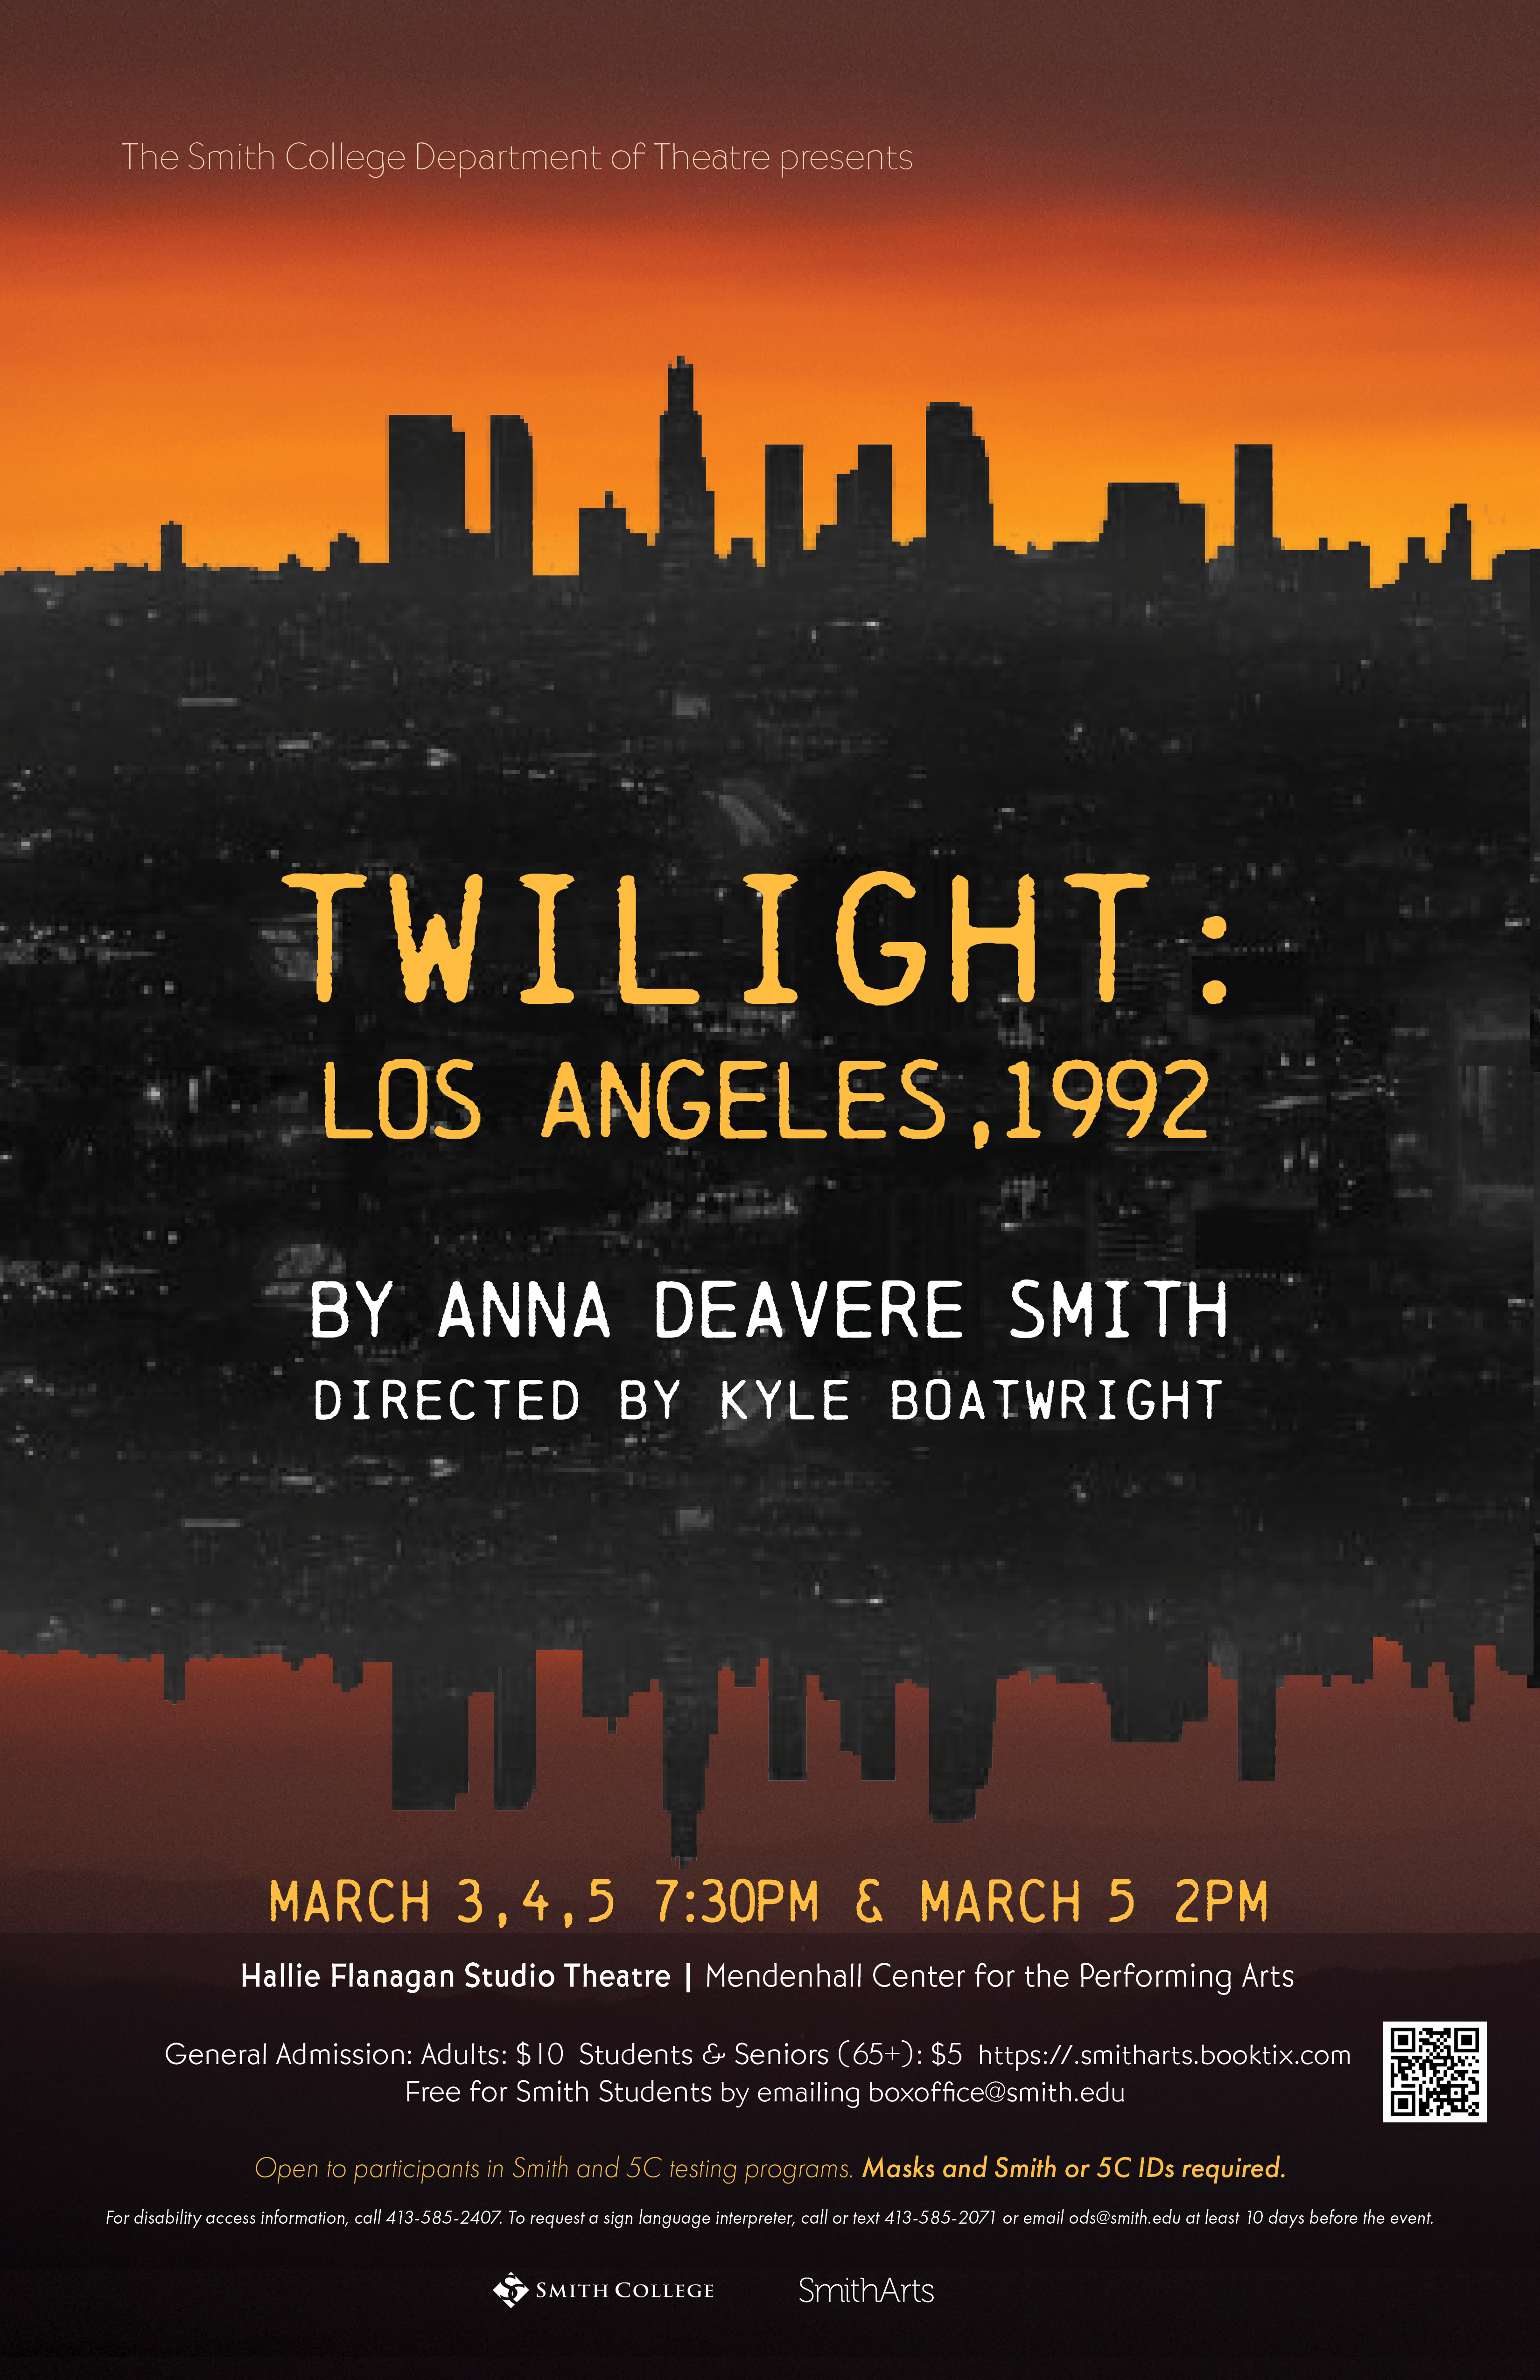 Twilight: Los Angeles, 1992 by Anna Deavere Smith in Hallie Flanagan Studio Theater on March 3, 4, 5 at 7:30 p.m., 2 p.m. matinee on March 5. Tickets required.